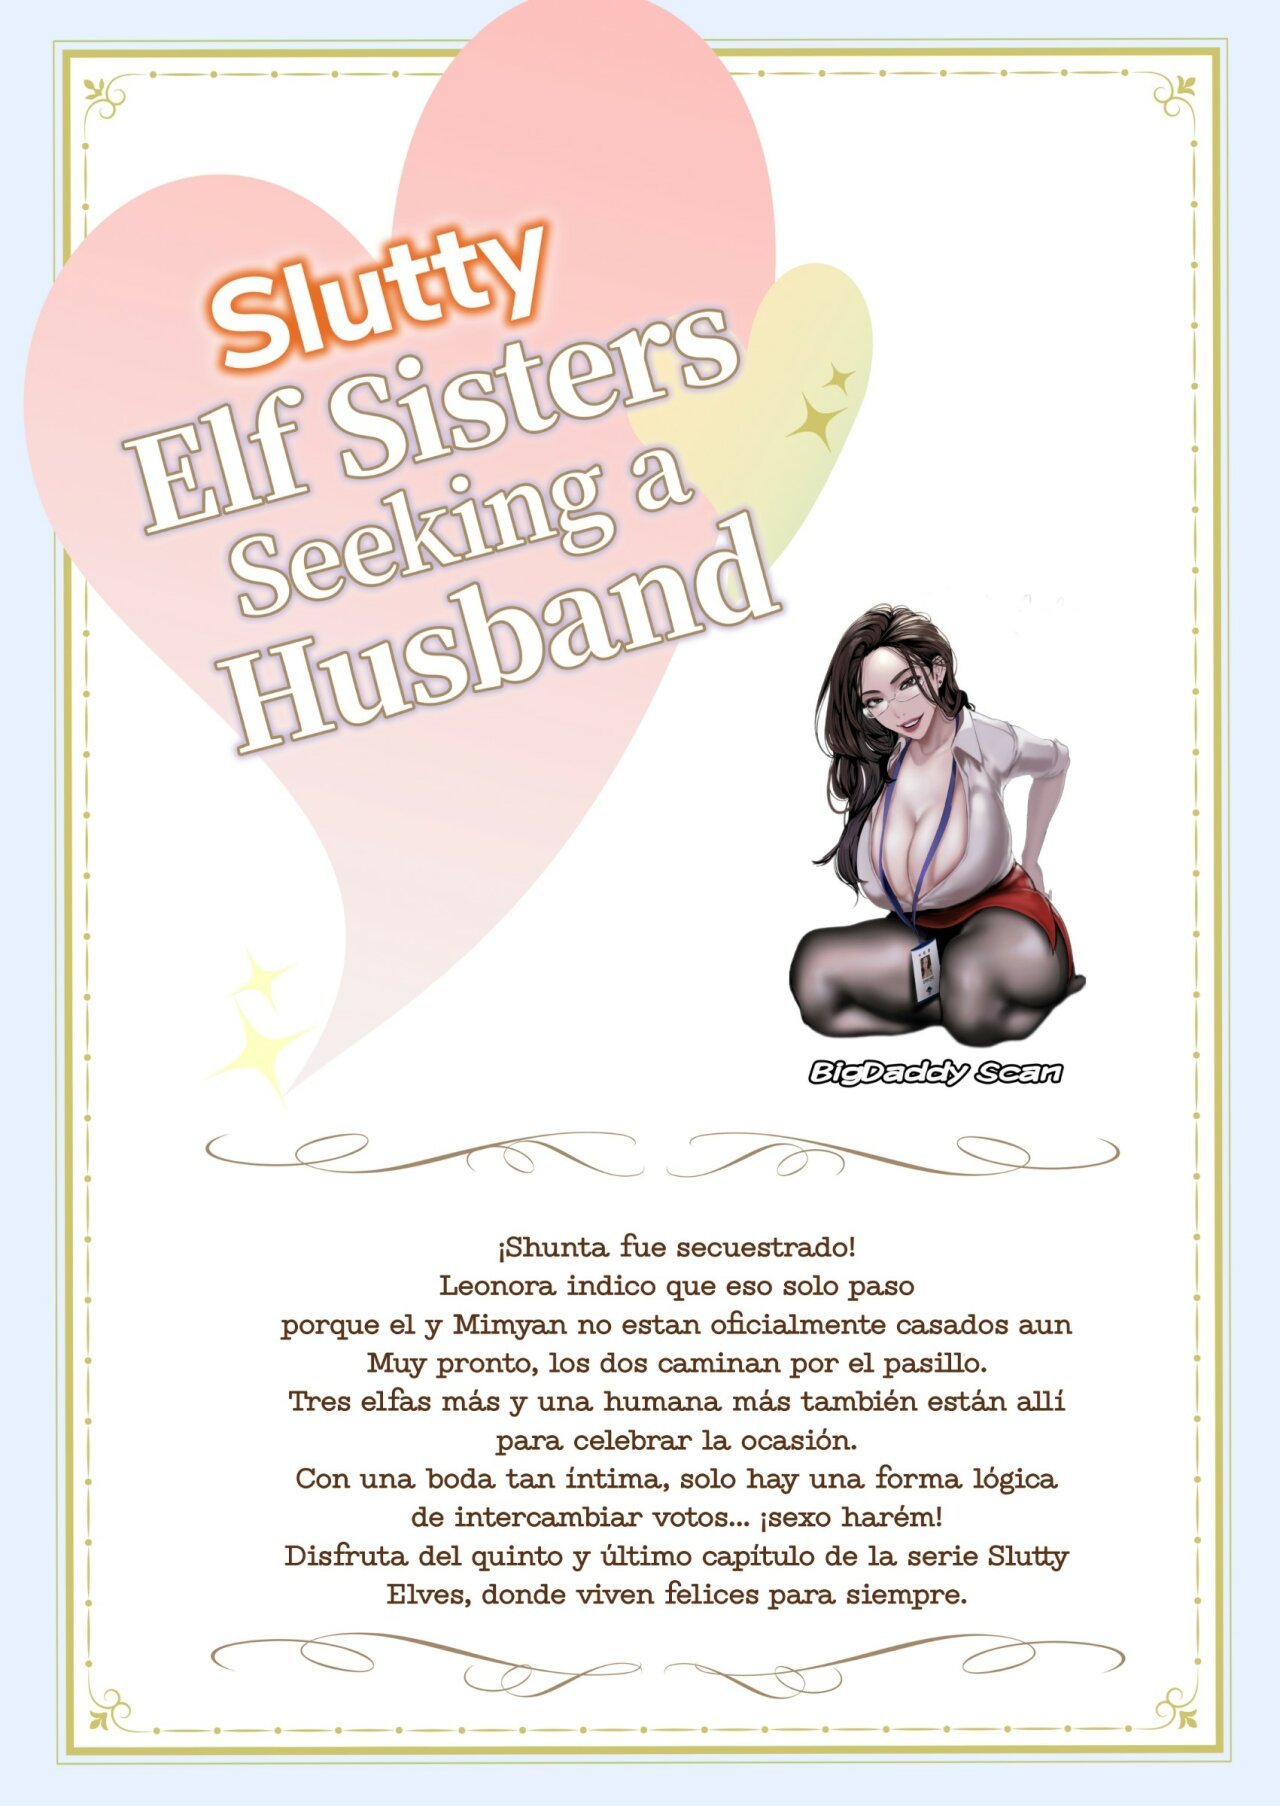 Slutty Elf Sisters Seeking a Husband 5 - With This Creampie I Thee Wed - 42